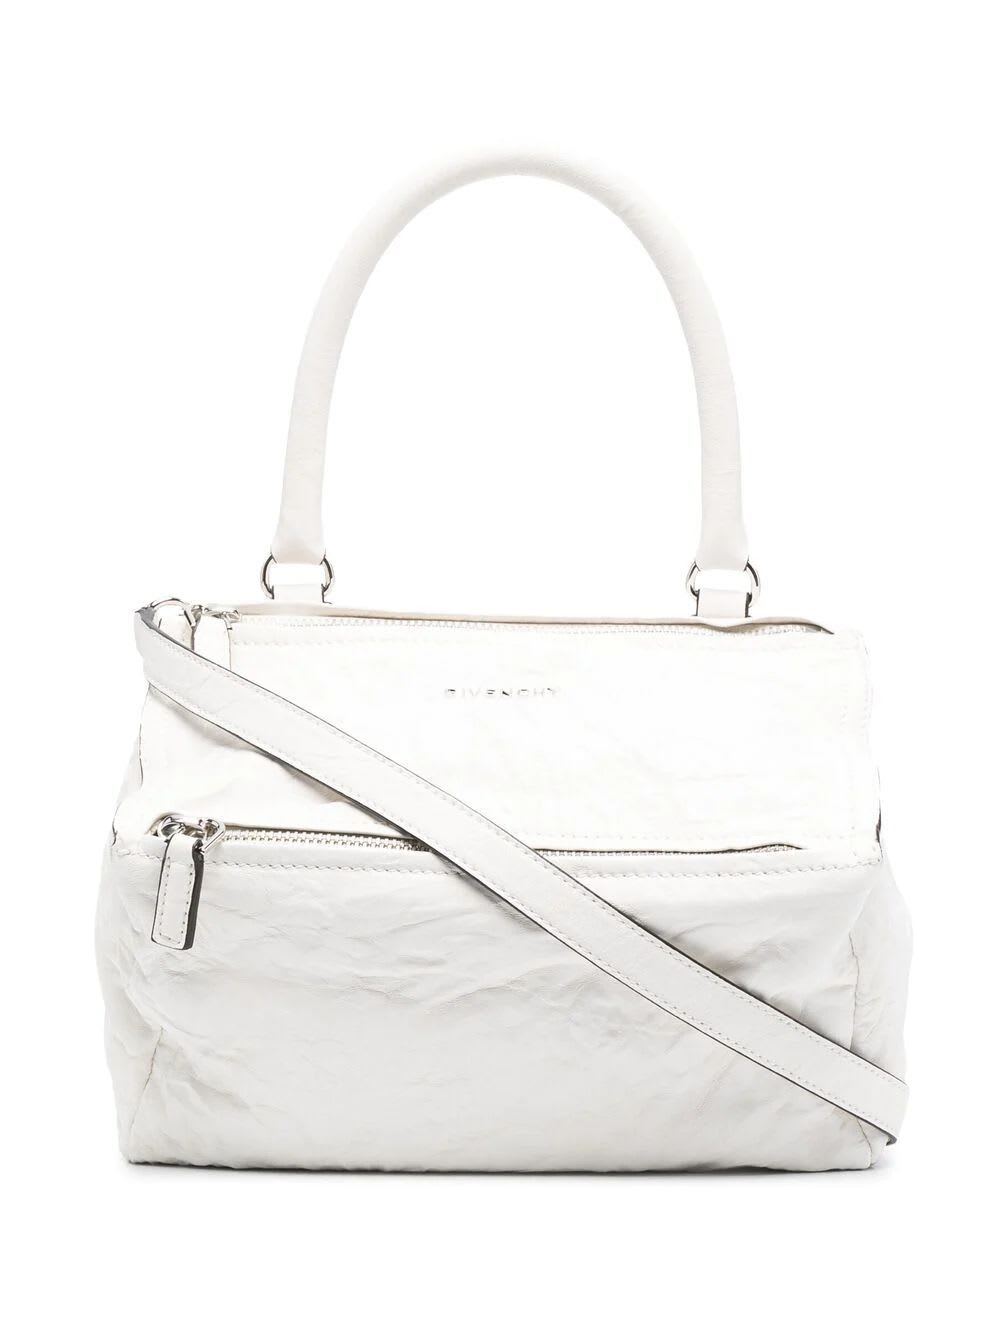 Givenchy White Small Pandora Bag In Aged Leather